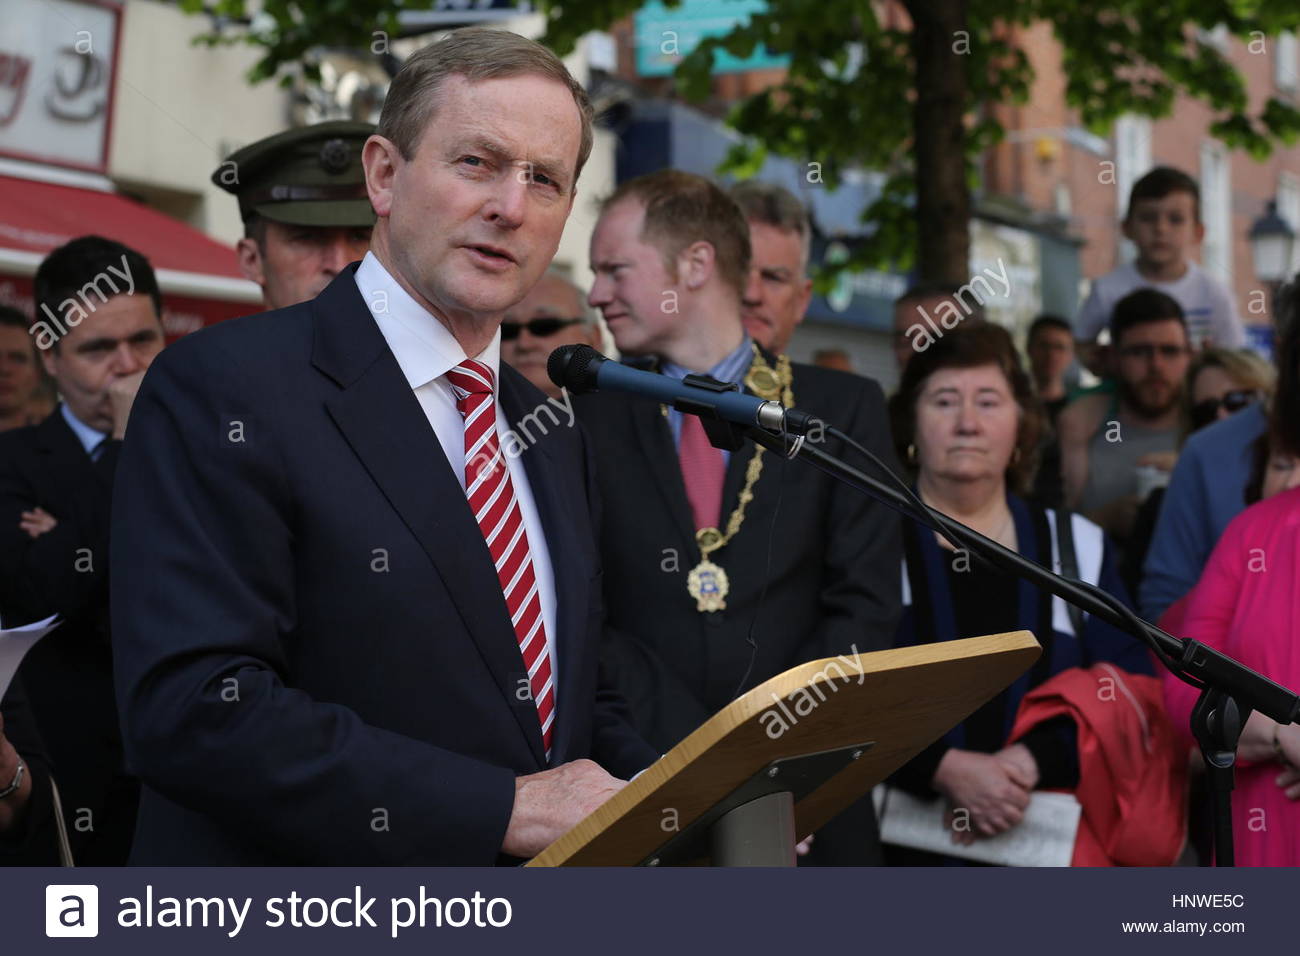 Irish Prime Minister or Taoiseach, Enda Kenny, speaking at a memorial service for the victims of the Dublin bombings Stock Photo